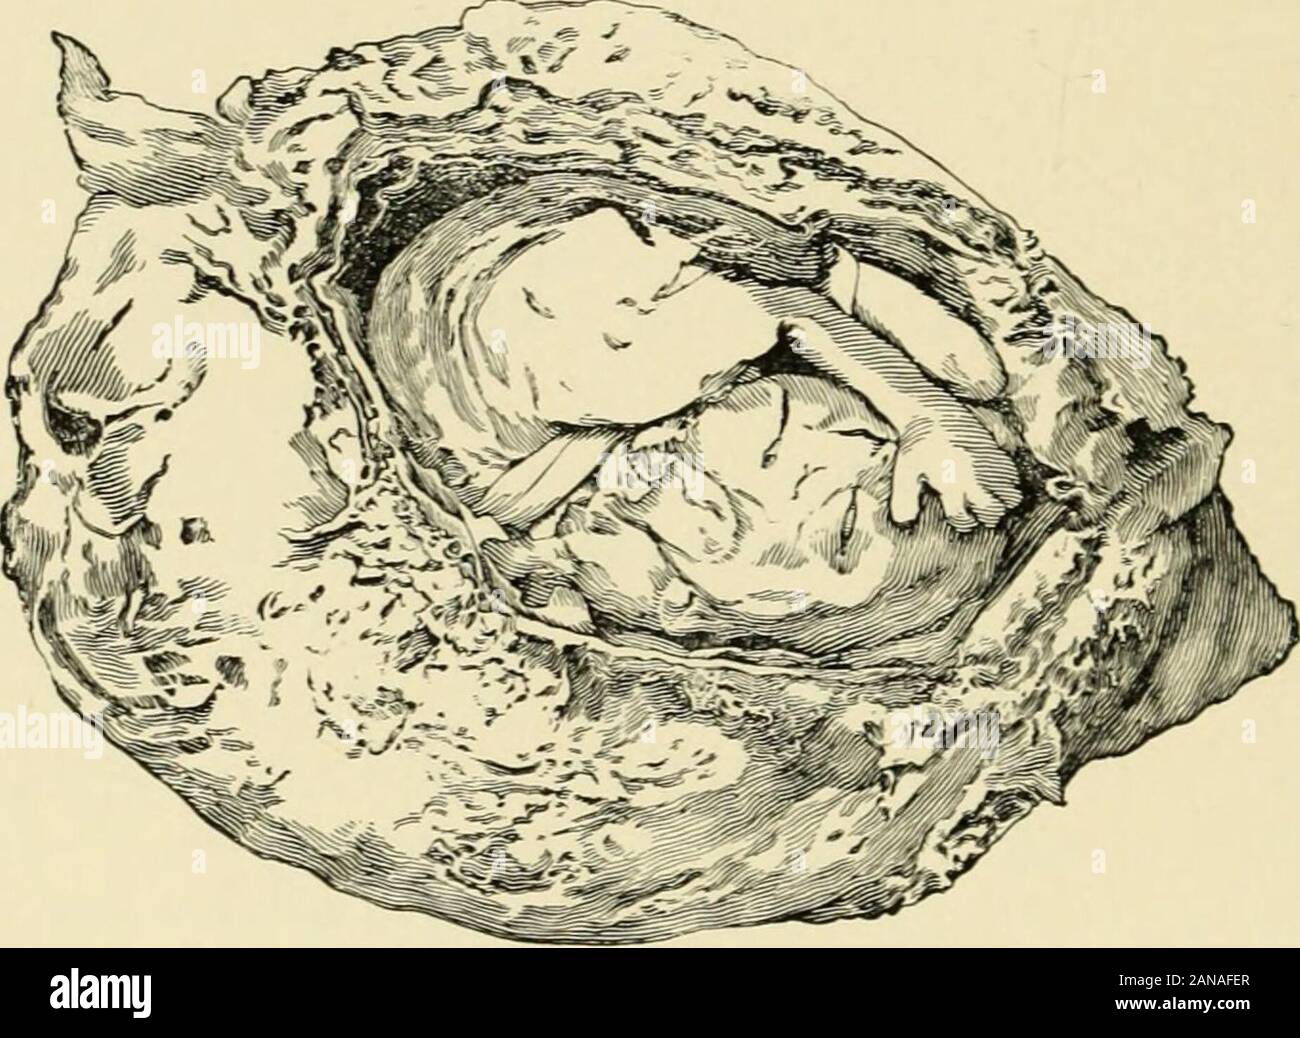 A textbook of obstetrics . Beitrage zurPathologie des Eies, Monats. f. Geburtsh., Bd. xxxi, S. 34. 5 Tarnier et Budin, op. a/., p. 474. 6 Pathology of Intra-uterine Death, London, 1887, p. 8. 248 PREGNANCY. Clinical Phenomena of Abortion.—The main clinical phe-nomena of abortion are: (1) Hemorrhage, (2) pain, and (3) theexpulsion of more or less characteristic portions of an impreg-nated ovum. But these symptoms are rarely all manifested in atypical manner in every case. Pain may be absent, hemorrhagenot excessive, and the whole ovum when cast off so small that itescapes unnoticed among the cl Stock Photo